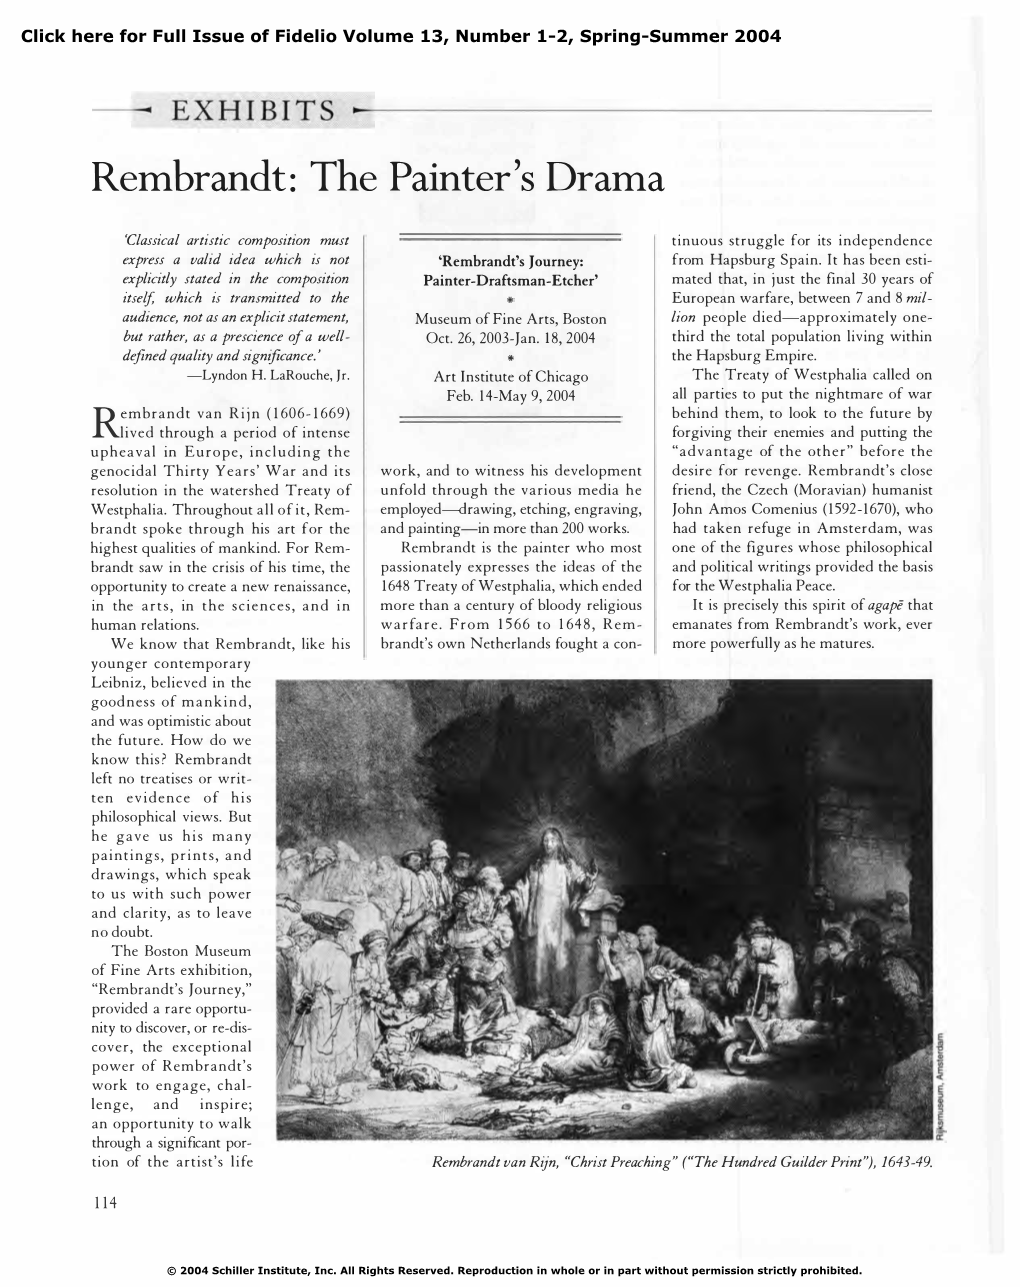 Rembrandt: the Painter's Drama